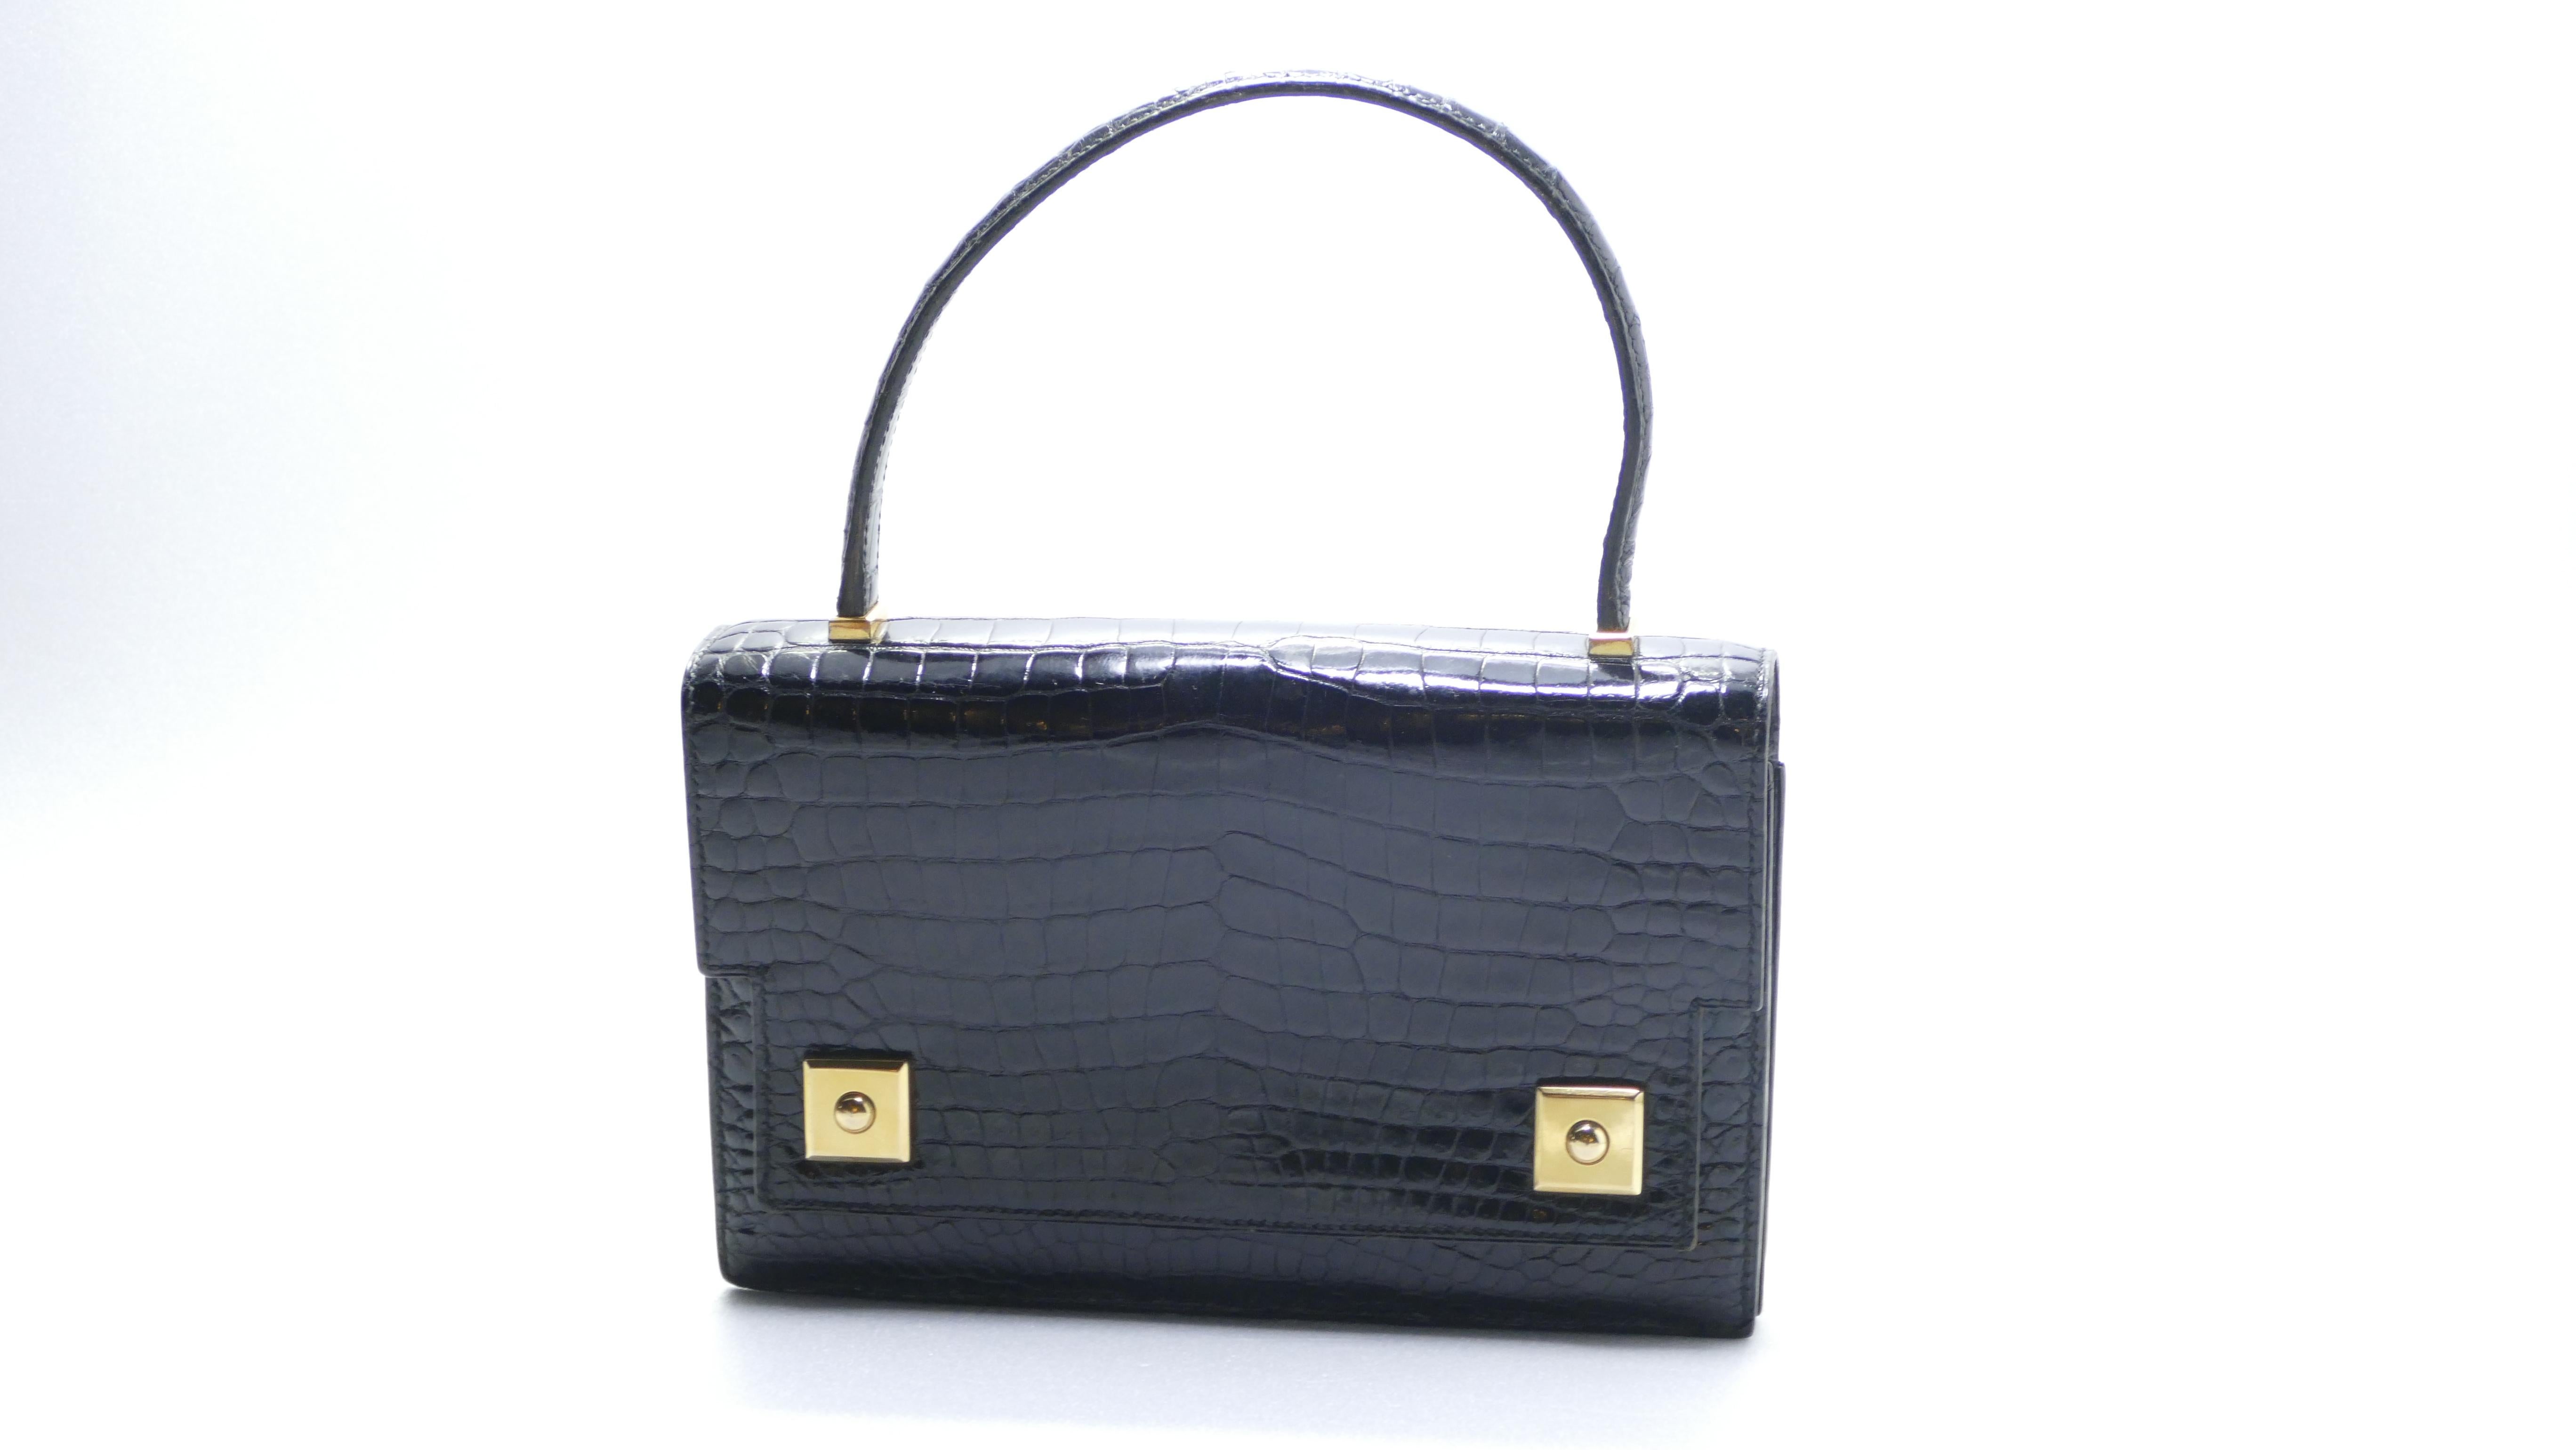 This rare Hermes Piano handbag is crafted from black Porosus crocodile, features crocodile top handle, frontal flap, and gold hardware. Its magnetic peg-in-hole closures open to a Noir black Agneau leather interior with dual compartments, flap